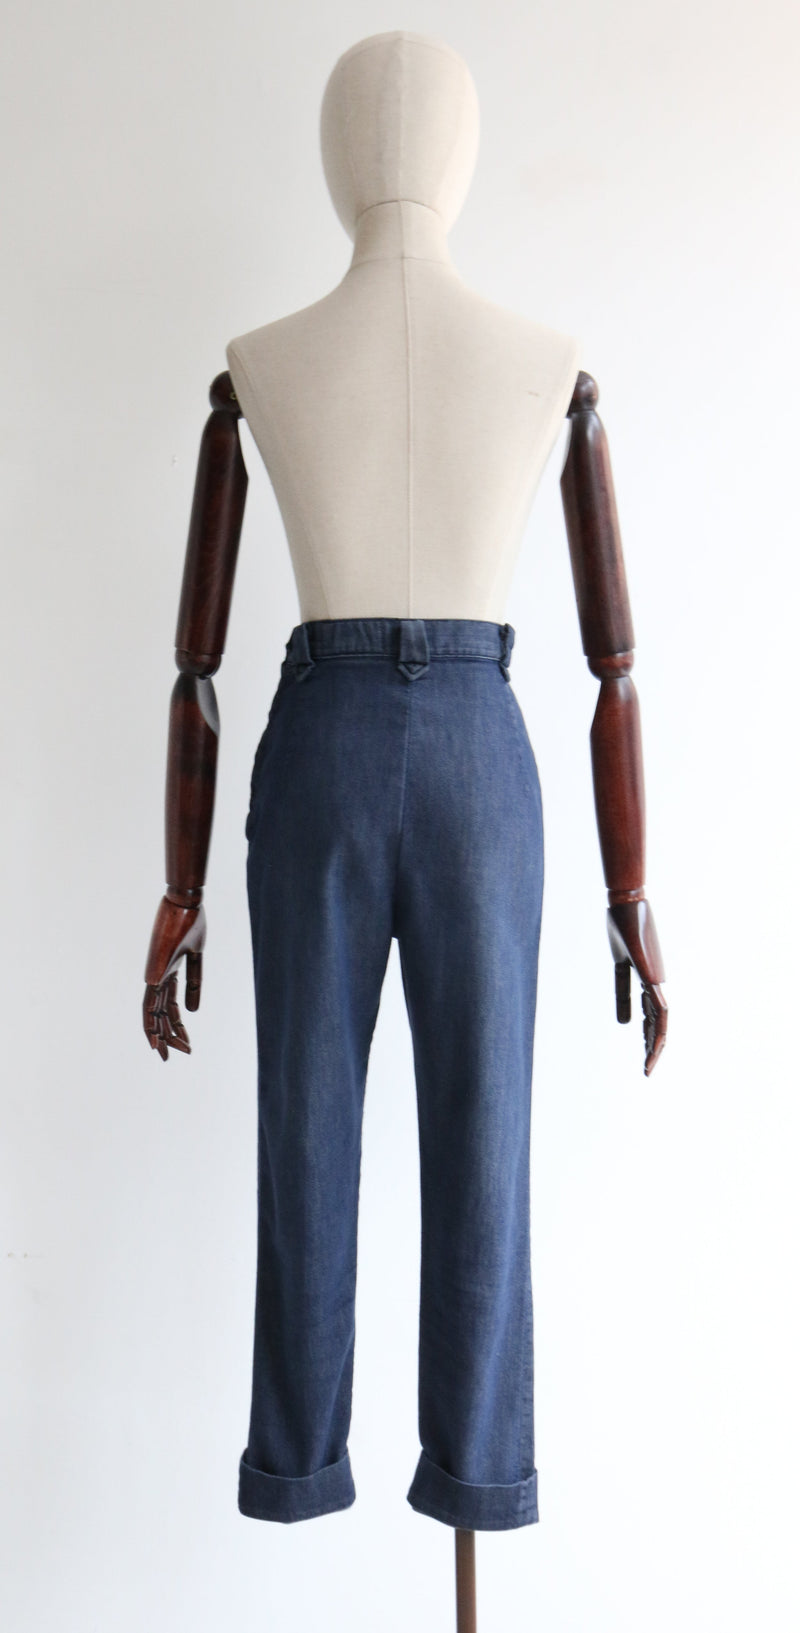 "Frontier Lady" Vintage 1950's Stretch Frontier Jeans UK 8 US 4